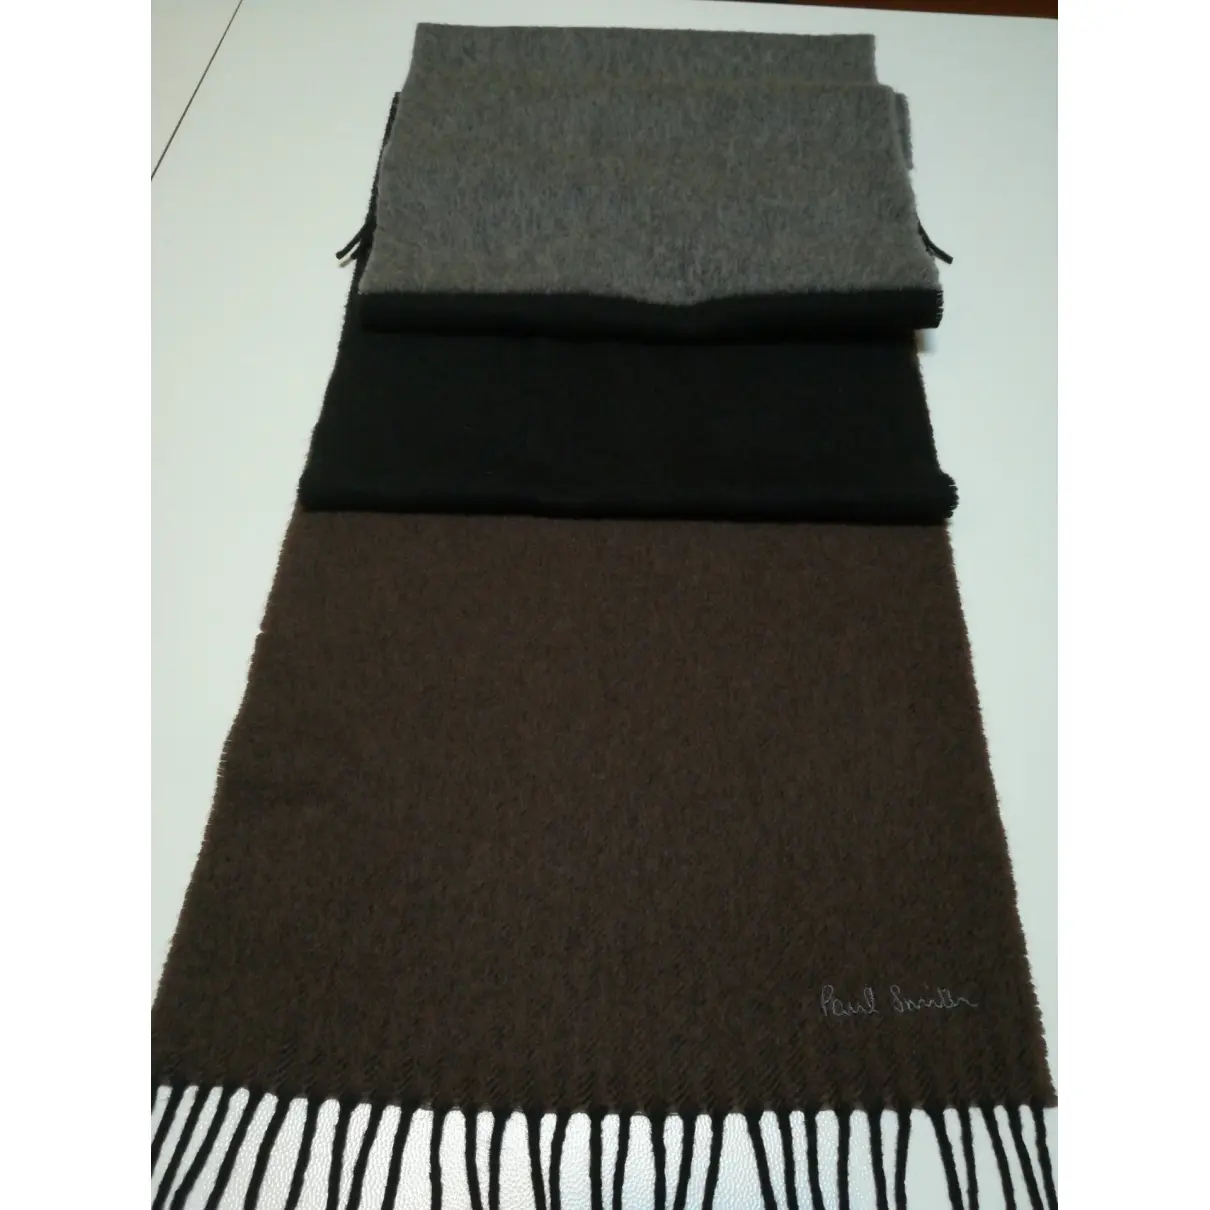 Paul Smith Wool scarf & pocket square for sale